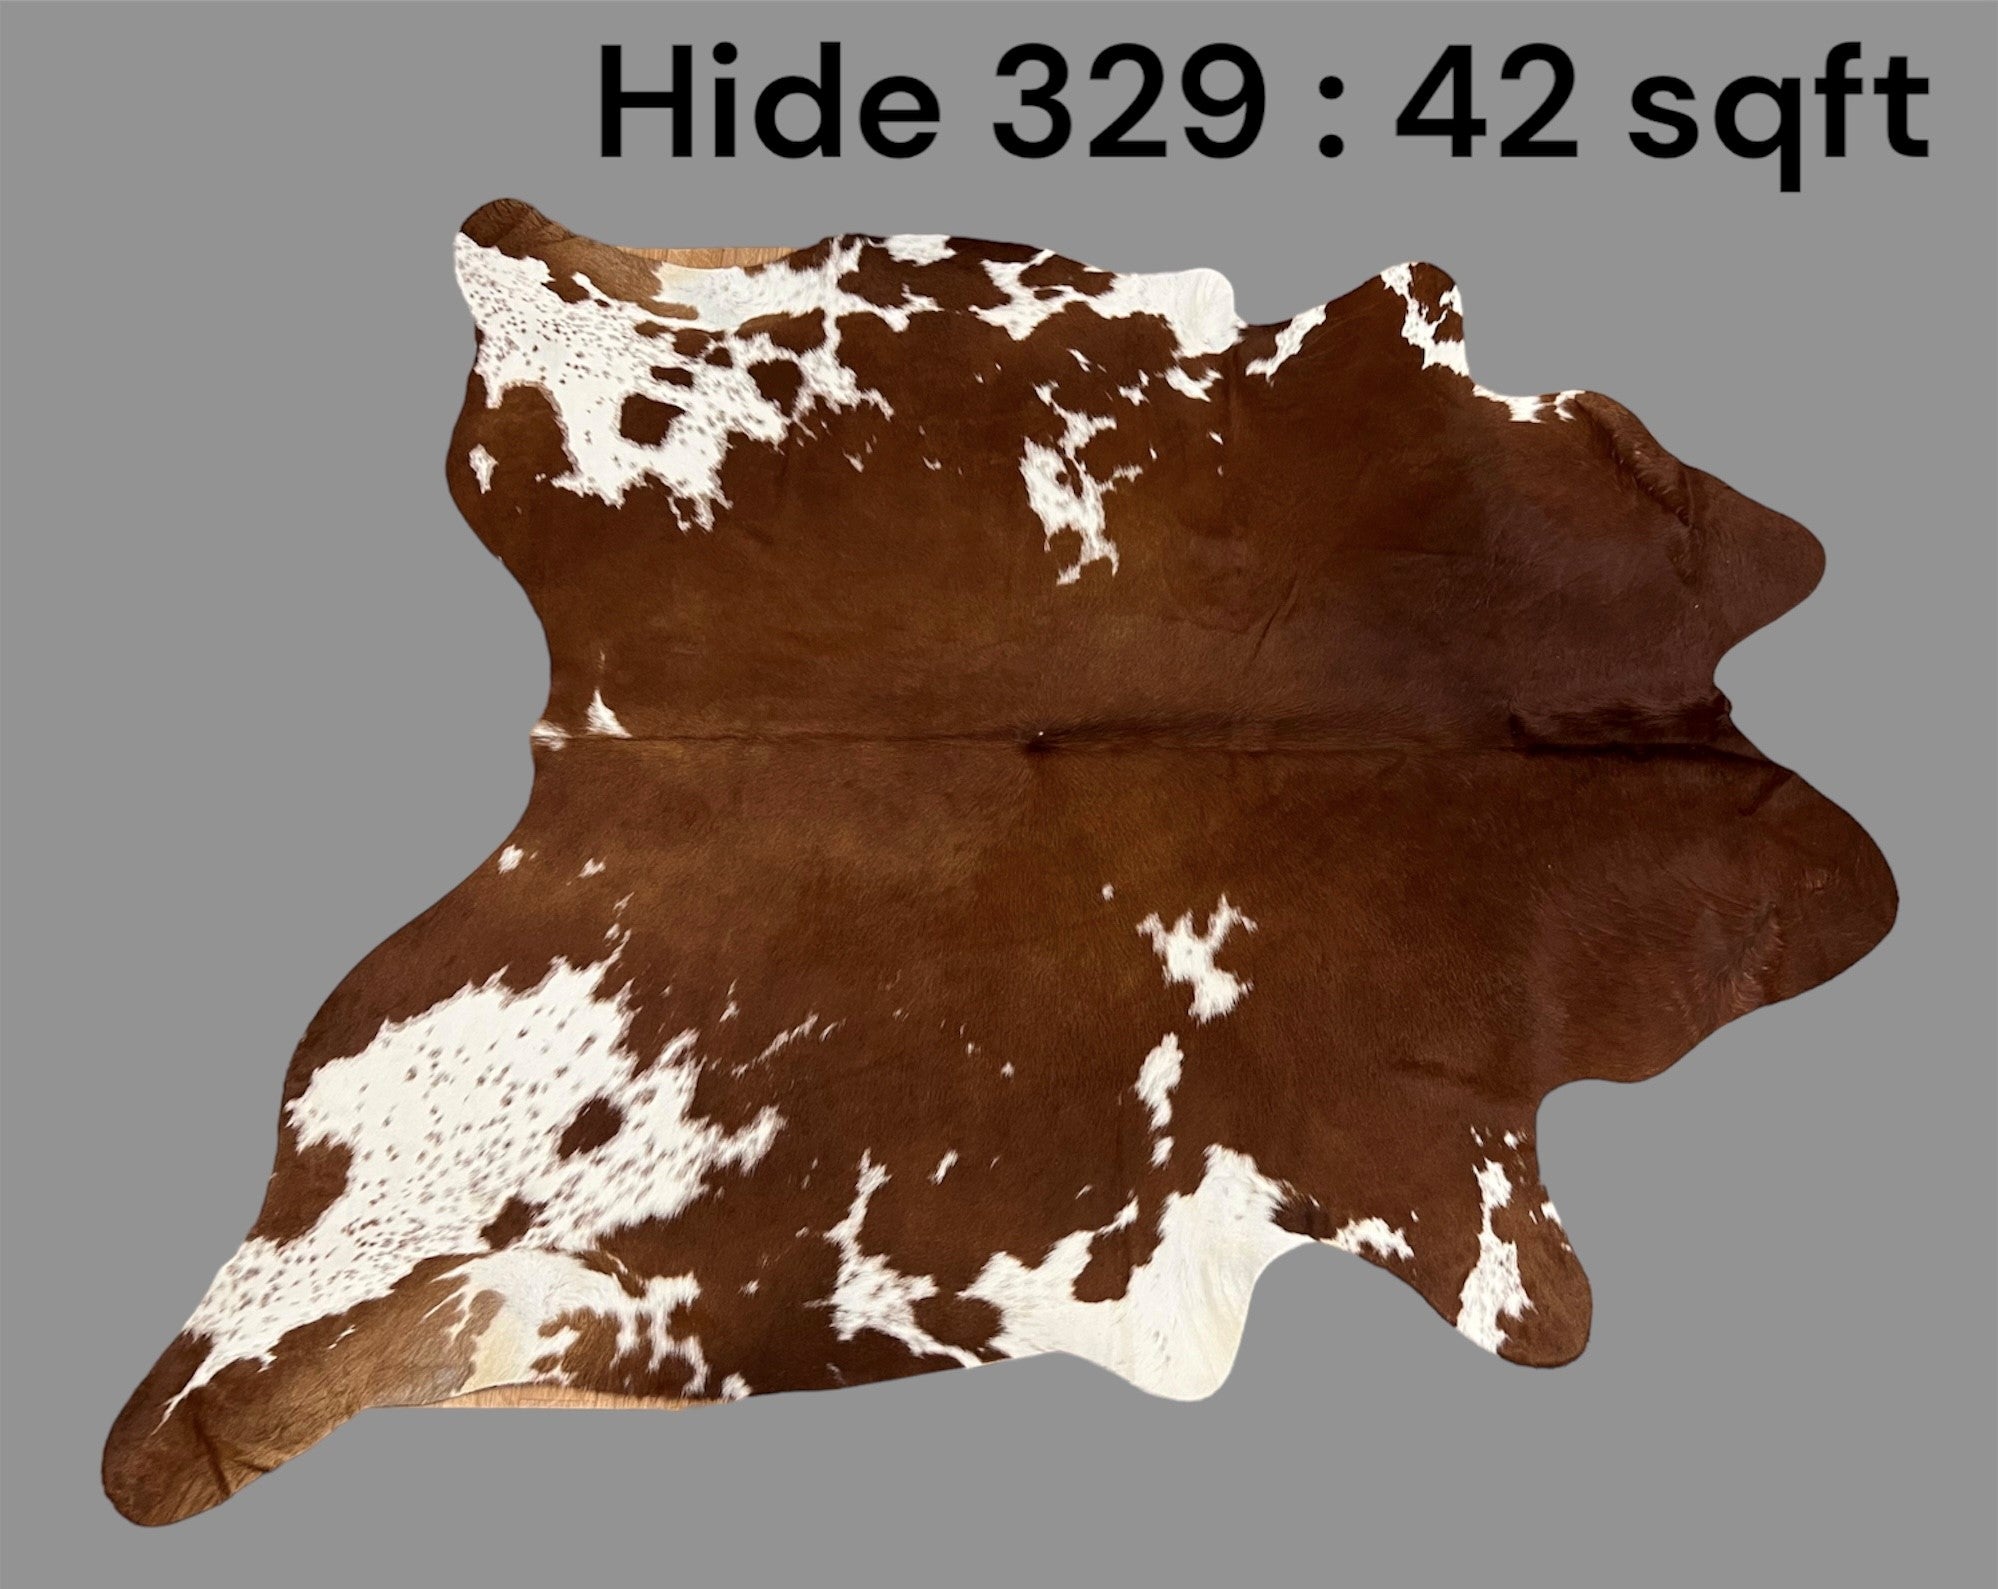 Natural Hair On Cow Hide : This Hide Is Perfect For Wall Hanging, Leather Rugs, Leather Upholstery & Leather Accessories. (Hide329)